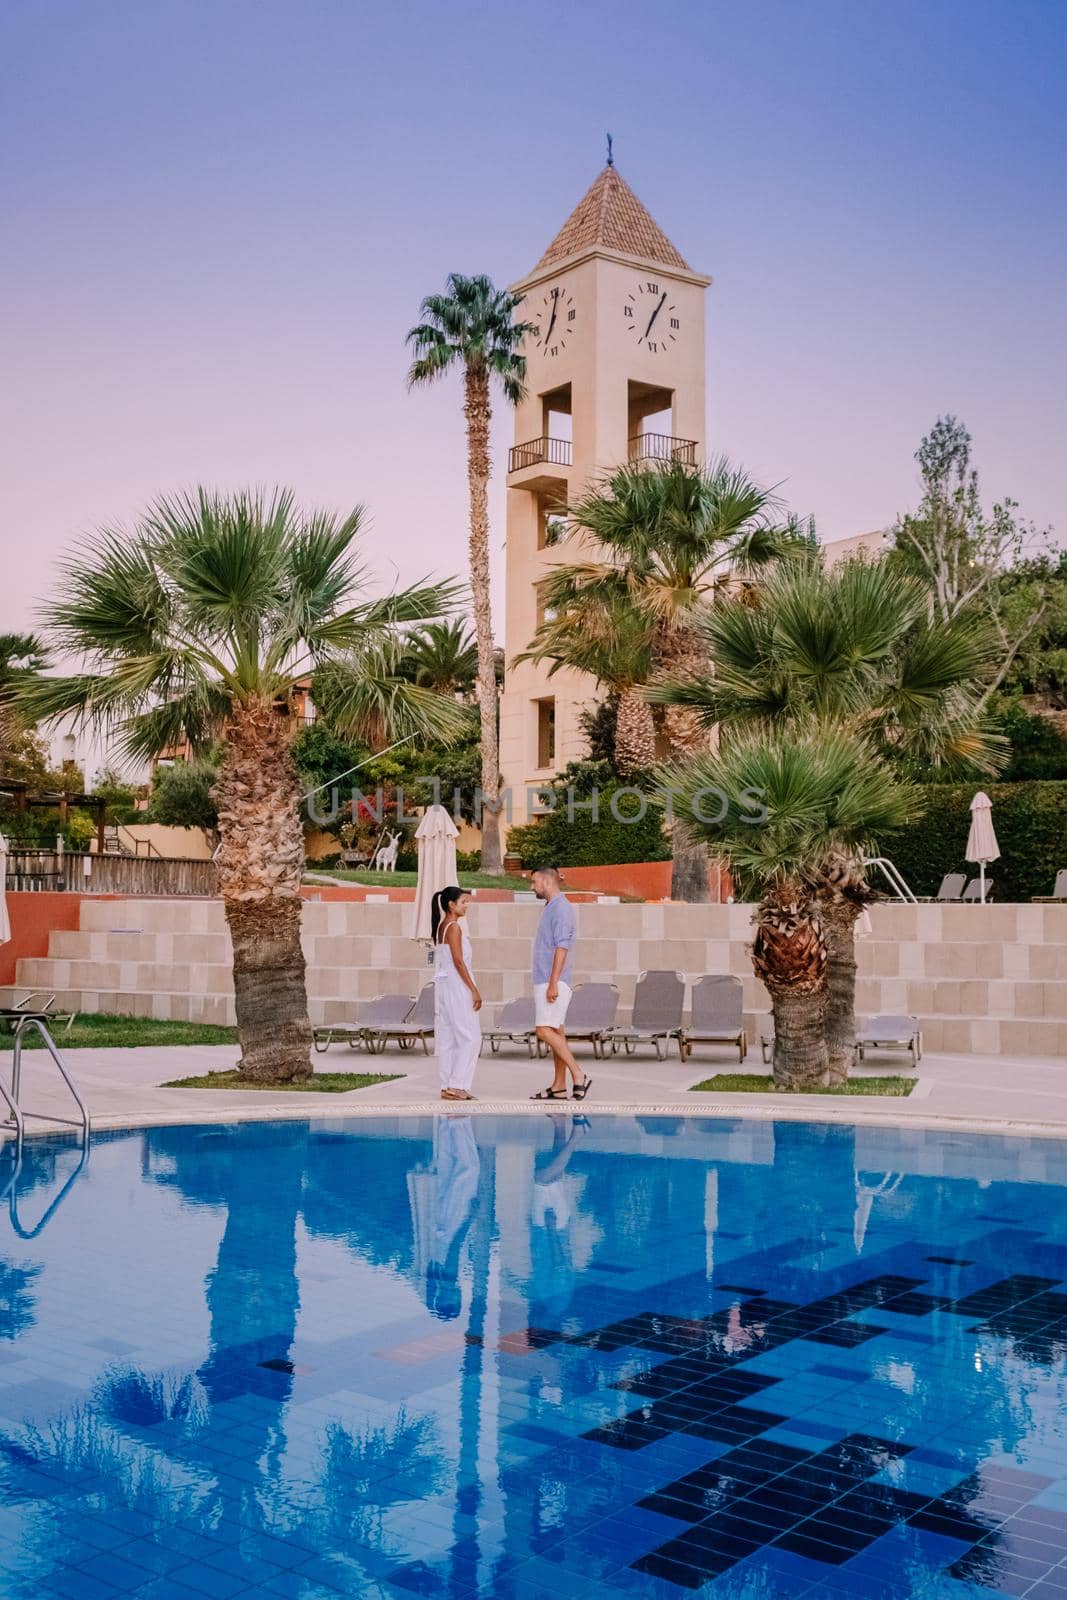 Crete Greece, Candia park village a luxury holiday village in Crete Greece by the ocean in traditional colors. Couple on vacation luxury resort